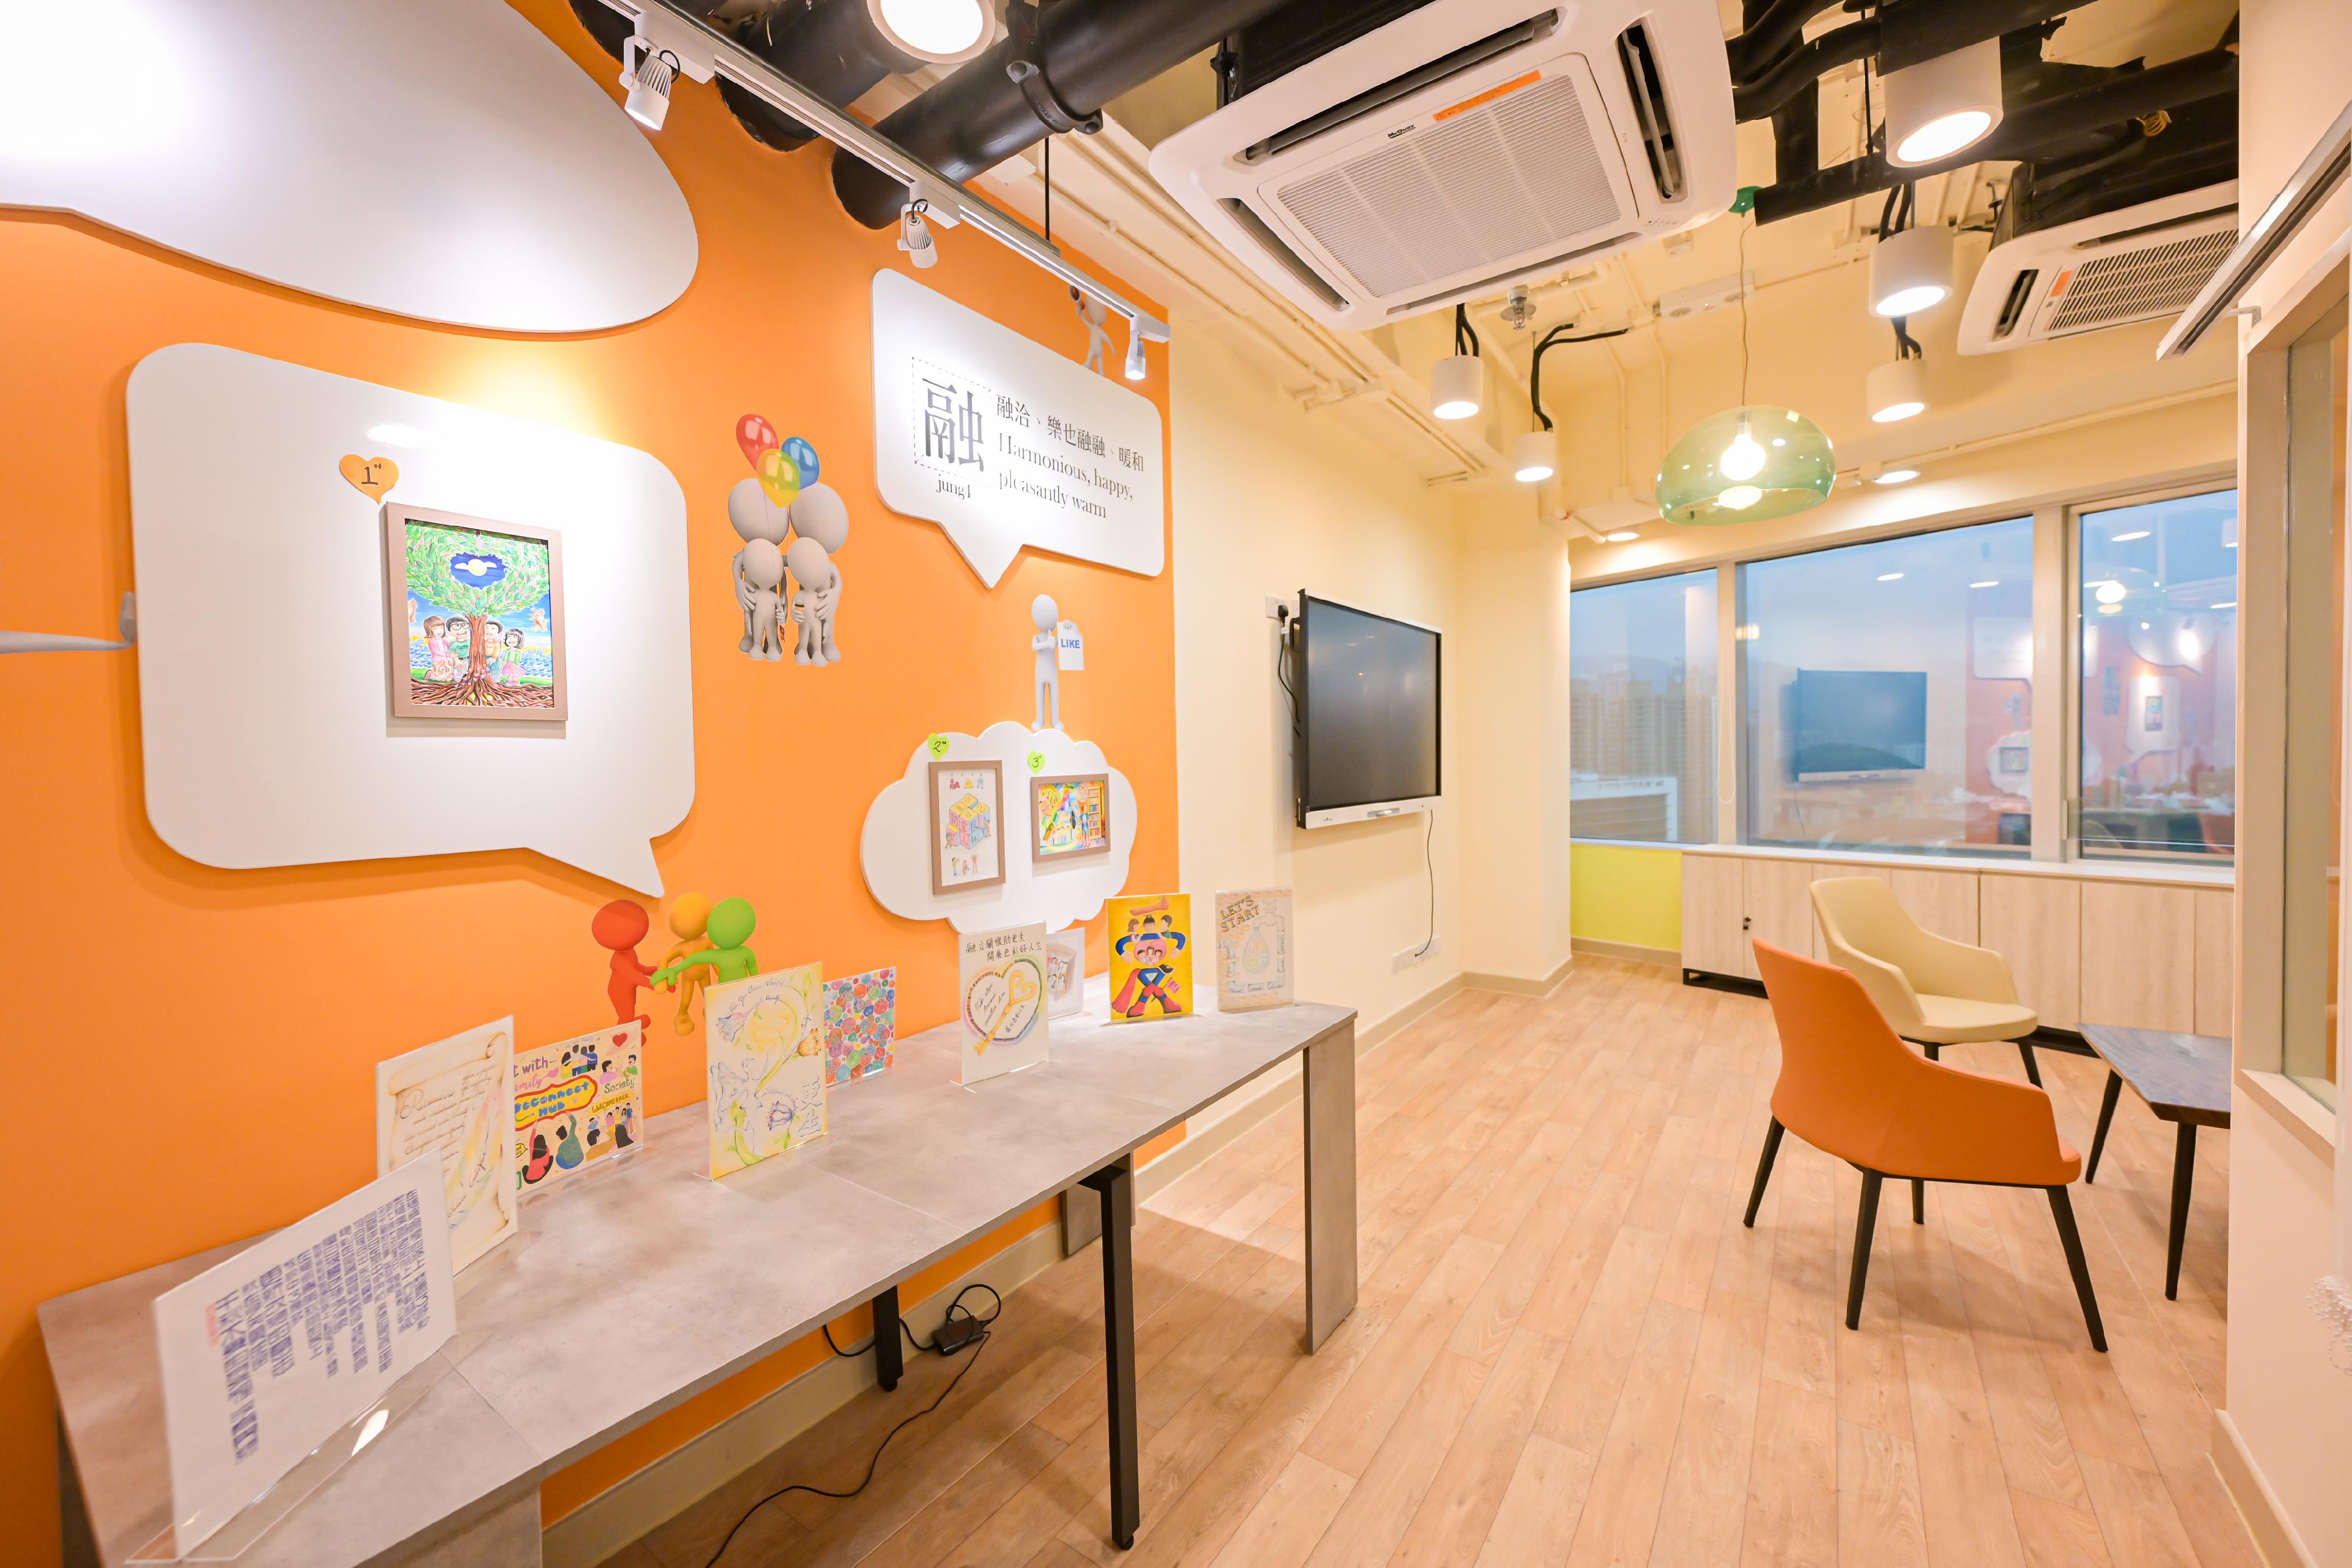 The Correctional Services Department officially launched its multi-purpose family and rehabilitation service centre in Sha Tin today (March 27). The service centre features a "ReConnect" Hub where the department's clinical psychologists will provide a series of psychological services for adult supervisees.